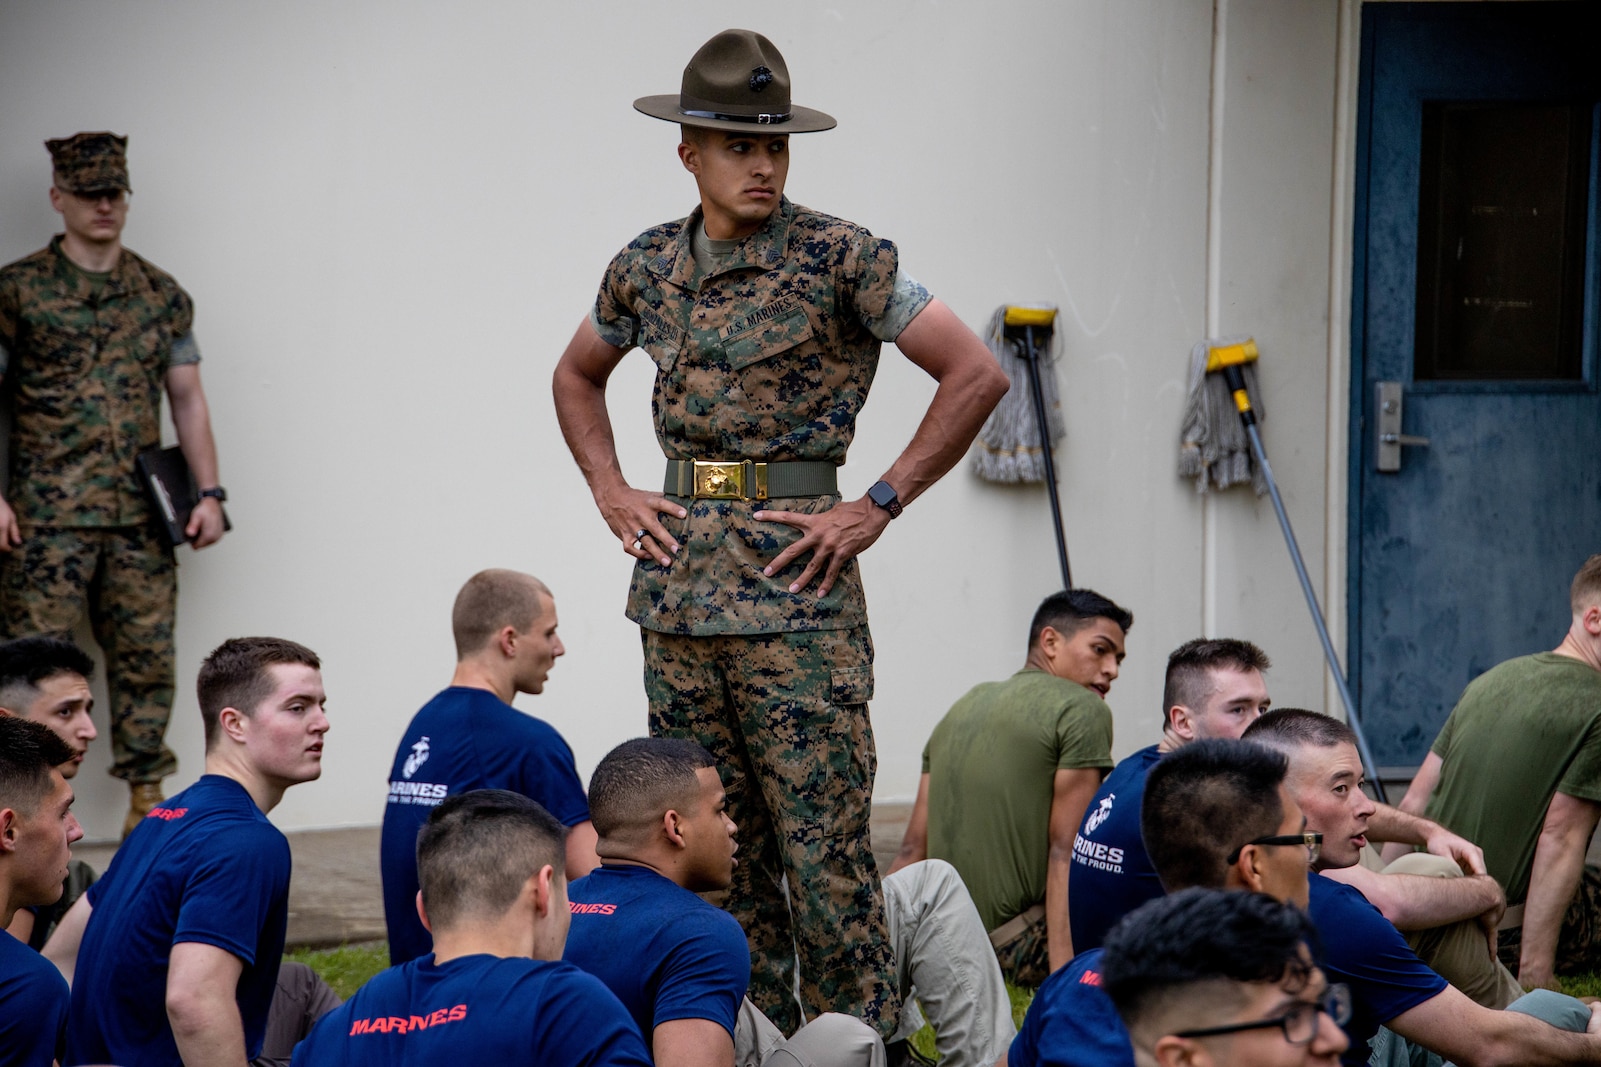 U.S. Marine Corps Sgt. Ramon Gonzales III, a drill instructor with Marine Corps Recruit Depot San Diego, motivates officer candidates with Recruiting Station Sacramento during a monthly pool function in South Sacramento, California on March 19, 2022. Pool functions are designed for future Marines to build camaraderie, improve fitness and learn leadership skills in preparation for Officer Candidates School. (U.S. Marine Corps photo by Cpl. Seaira Moore)